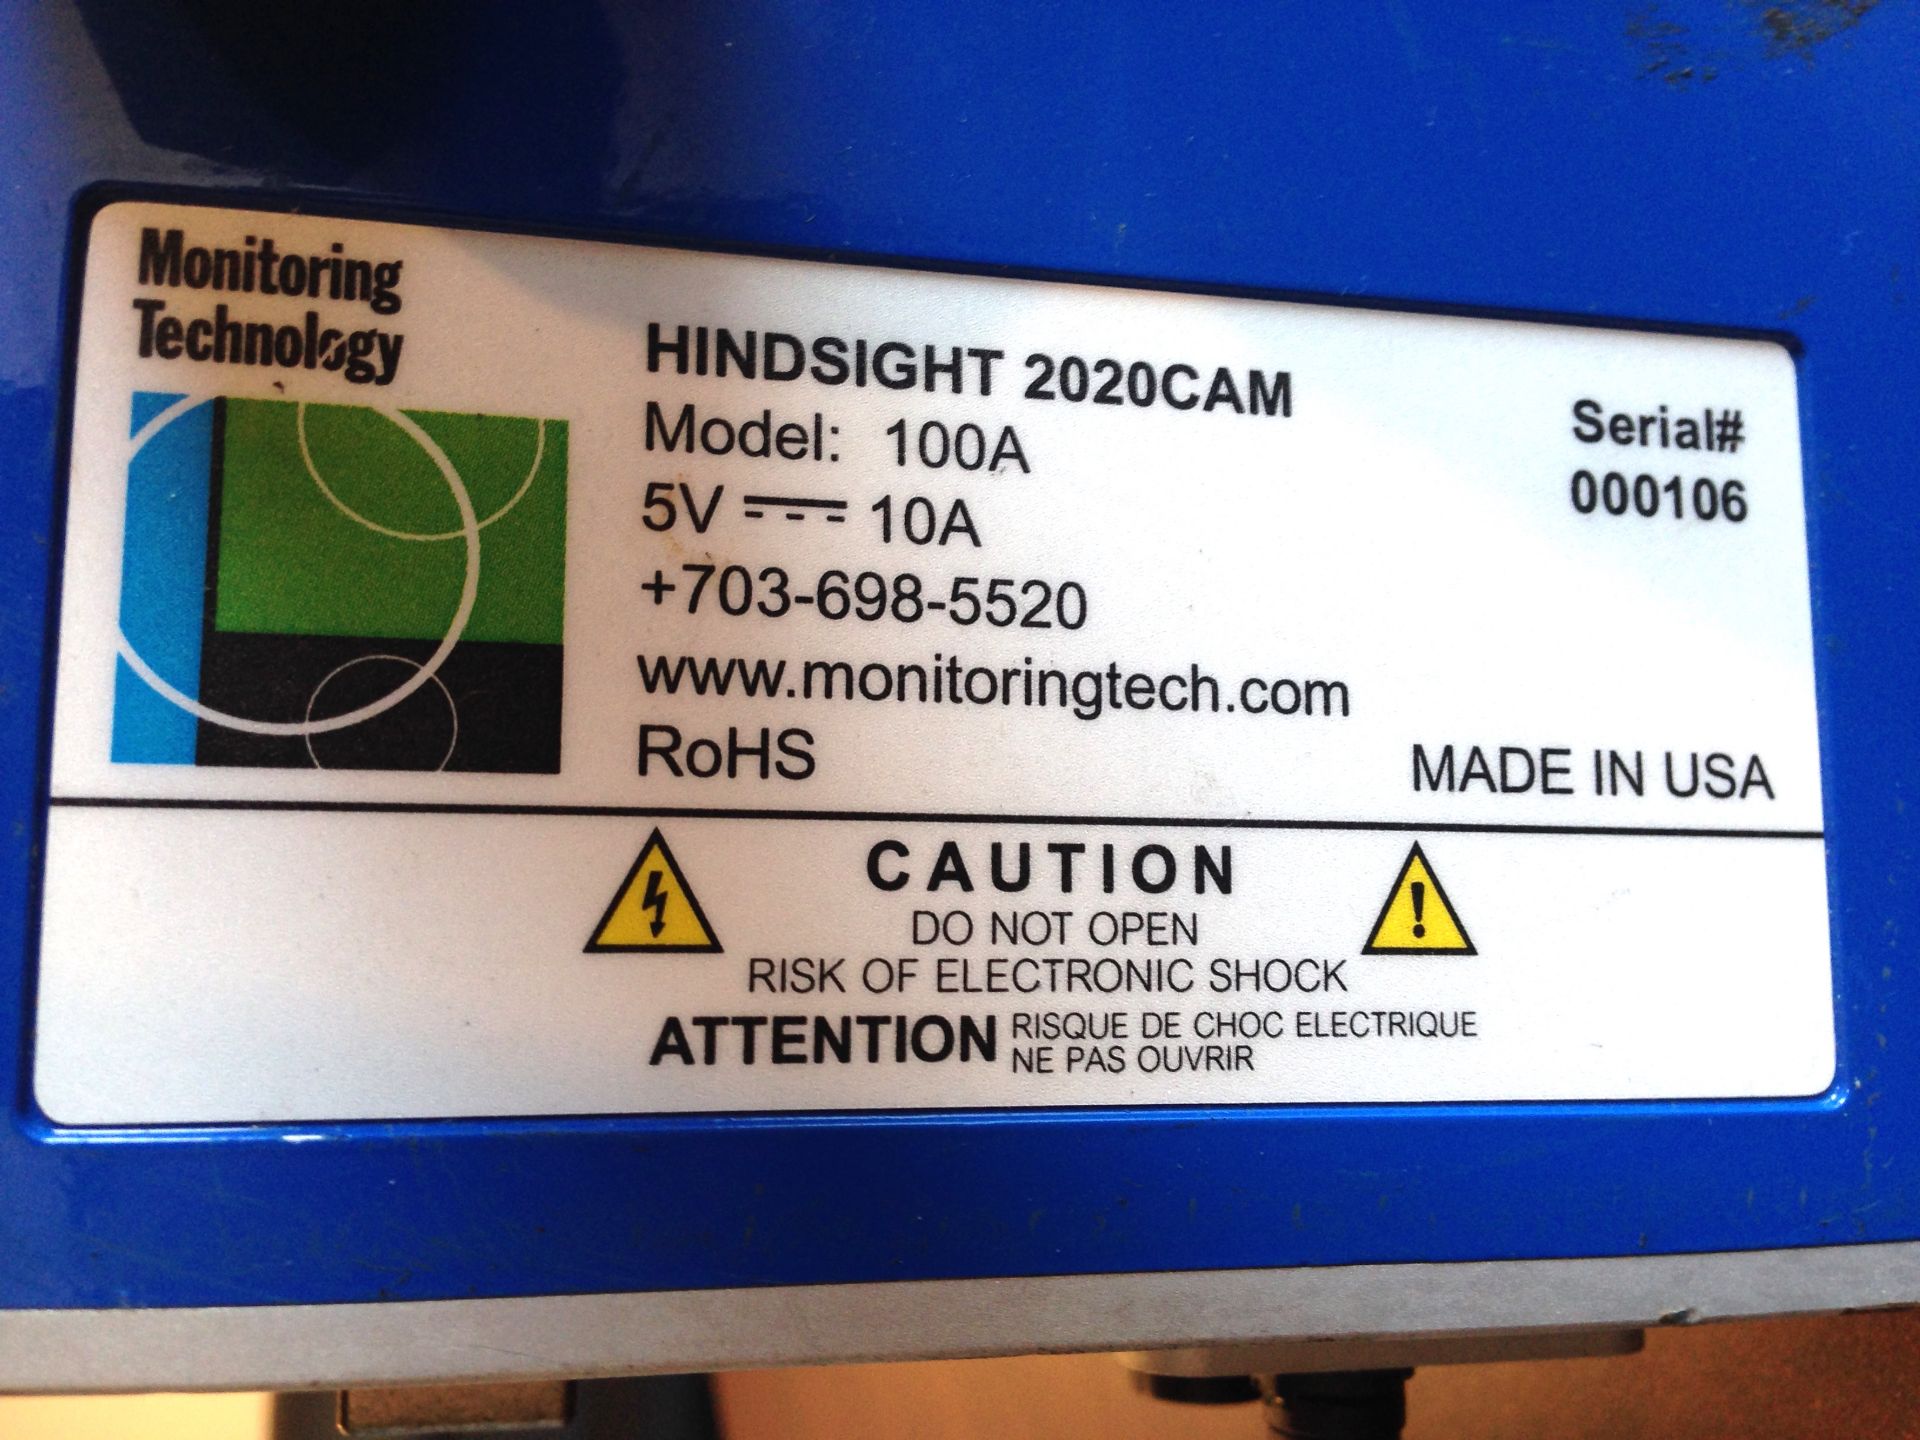 Hindsight 2020 Camera for Production Lines Model: 100A Serial: 000106Hindsight 2020CAM is a video - Image 6 of 8